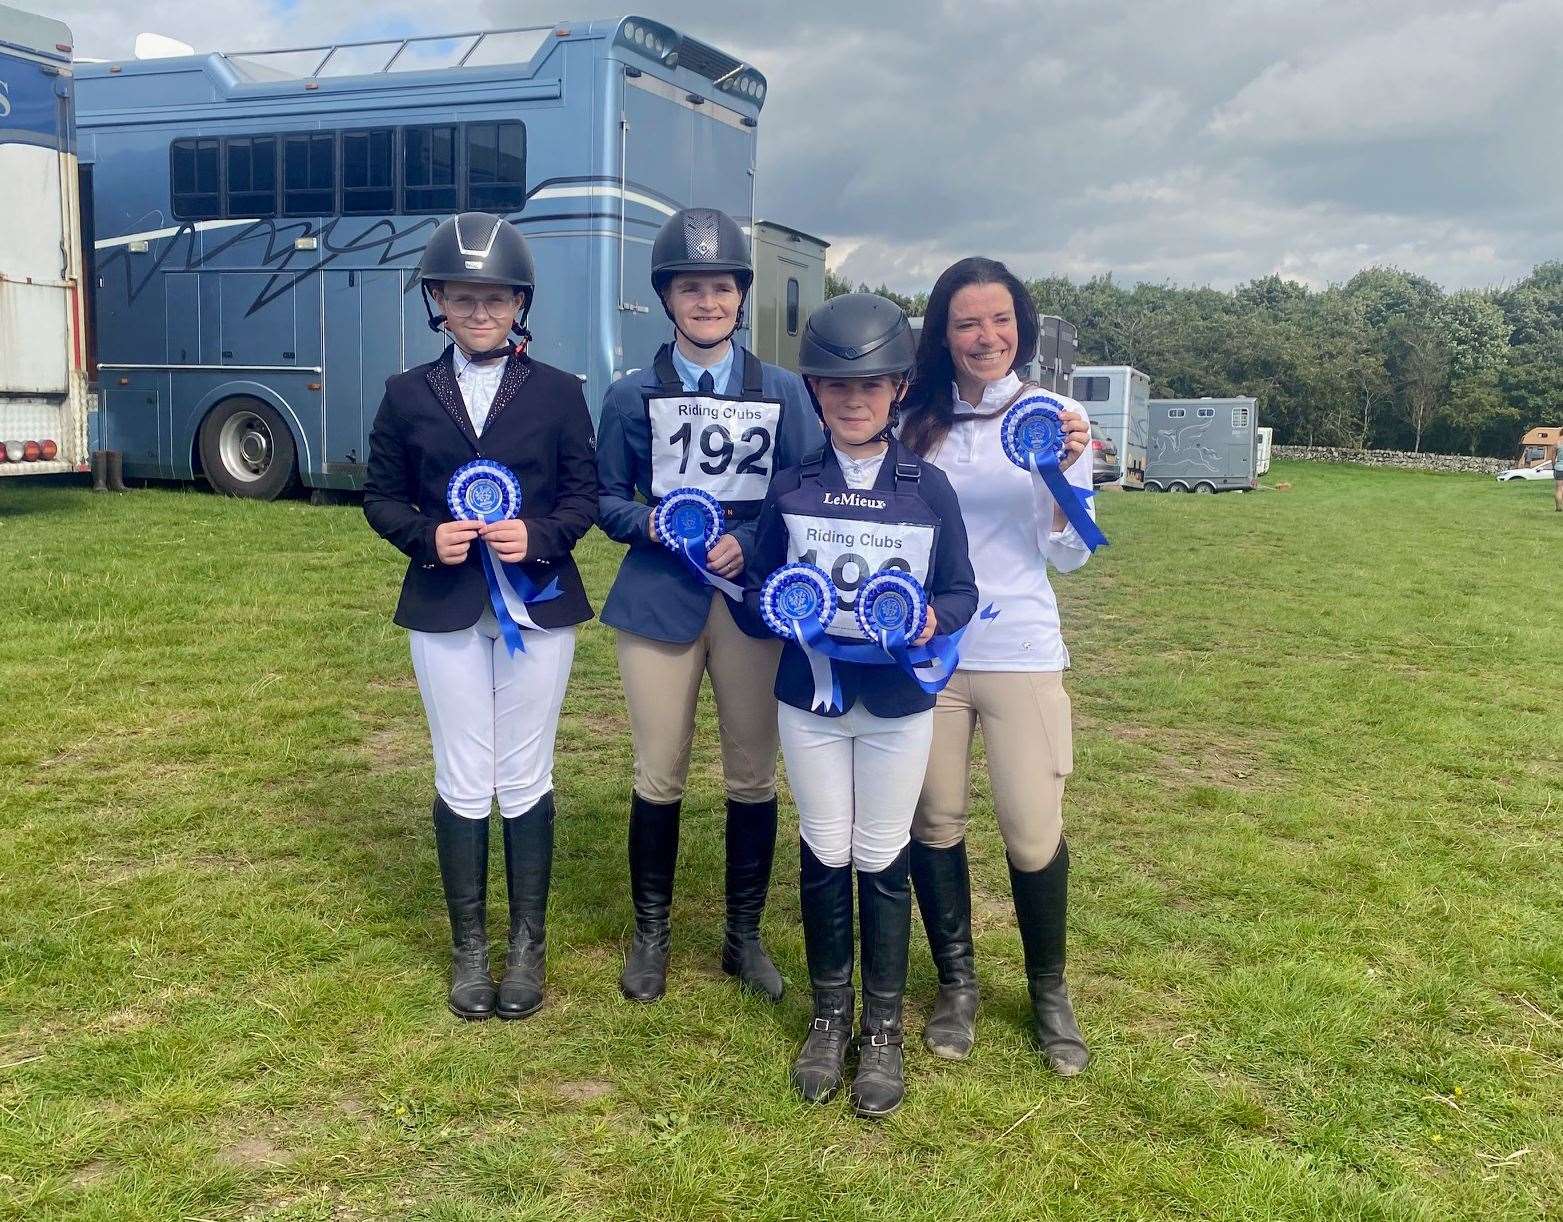 The third-placed 70cm team with their rosettes – (from left) Aimee Holmes, Lynne Sutherland, Erica Pottinger and Cal Flyn, Orkney.